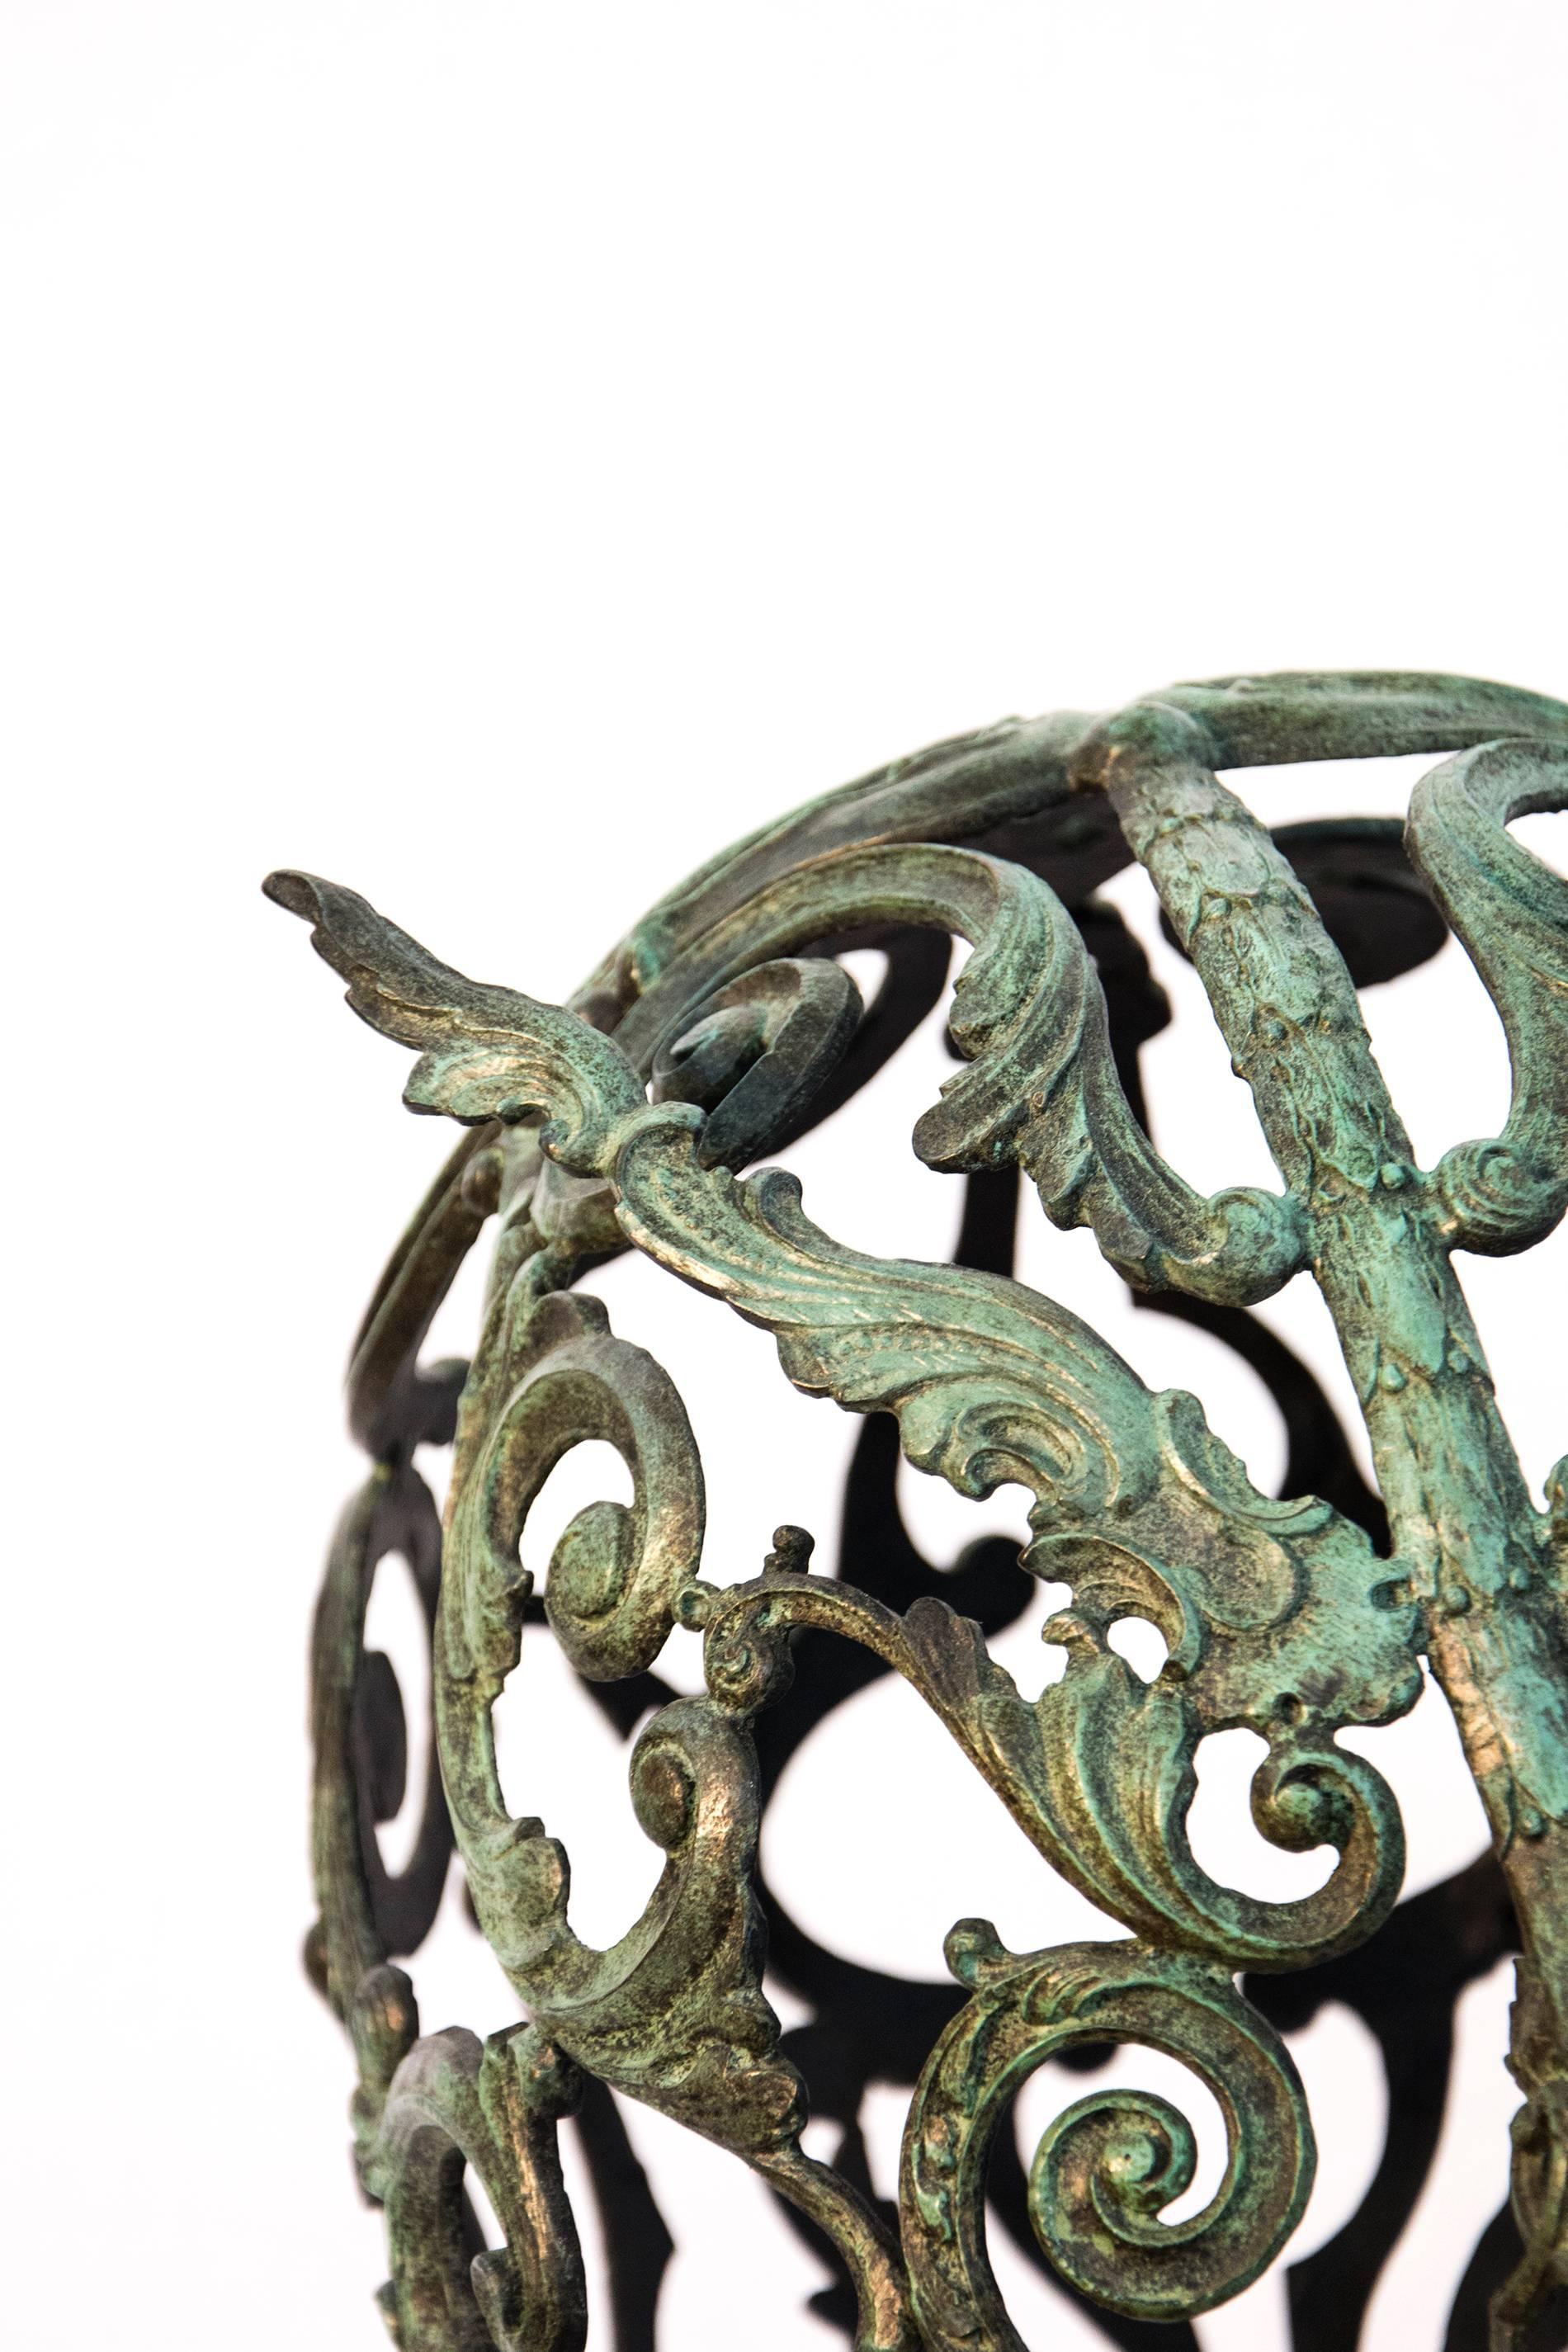 Bronze head fashion from cast found objects - the decorative elements added to furniture early in the last century. This piece is cast using elements of wood molding to create a mask in patina bronze. This body of work references the Baroque and